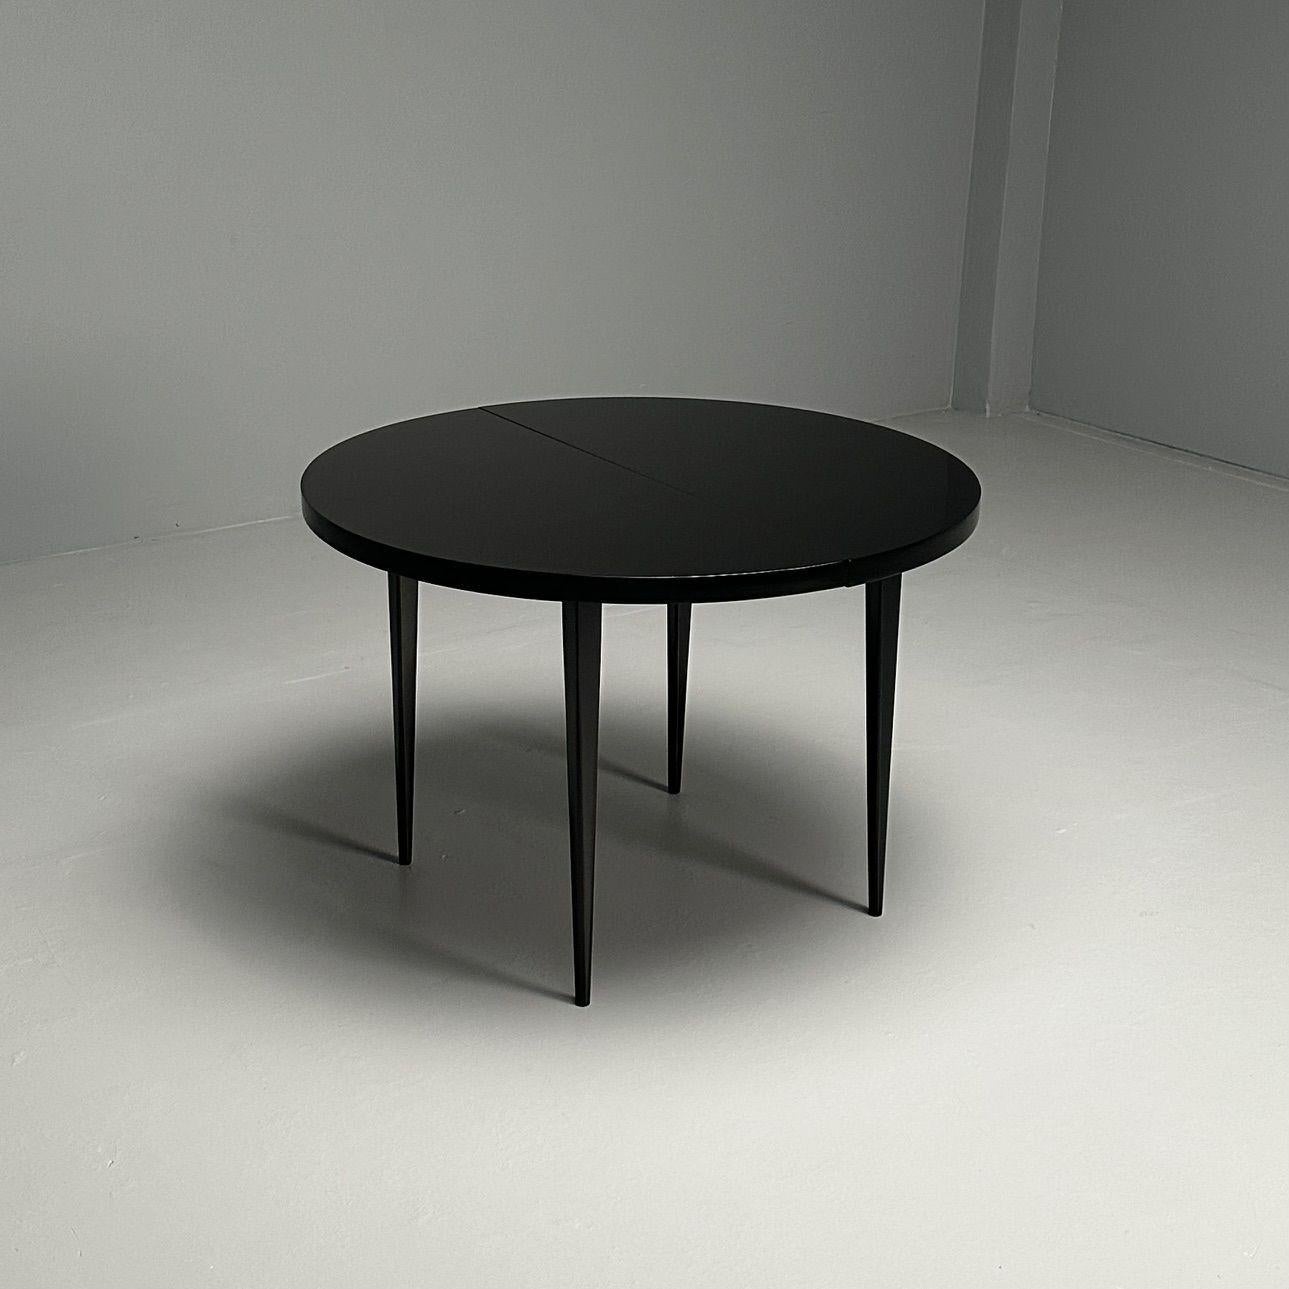 20th Century Paul McCobb, Mid-Century Modern Planner Group Dining Table, Black Lacquer, 1950s For Sale